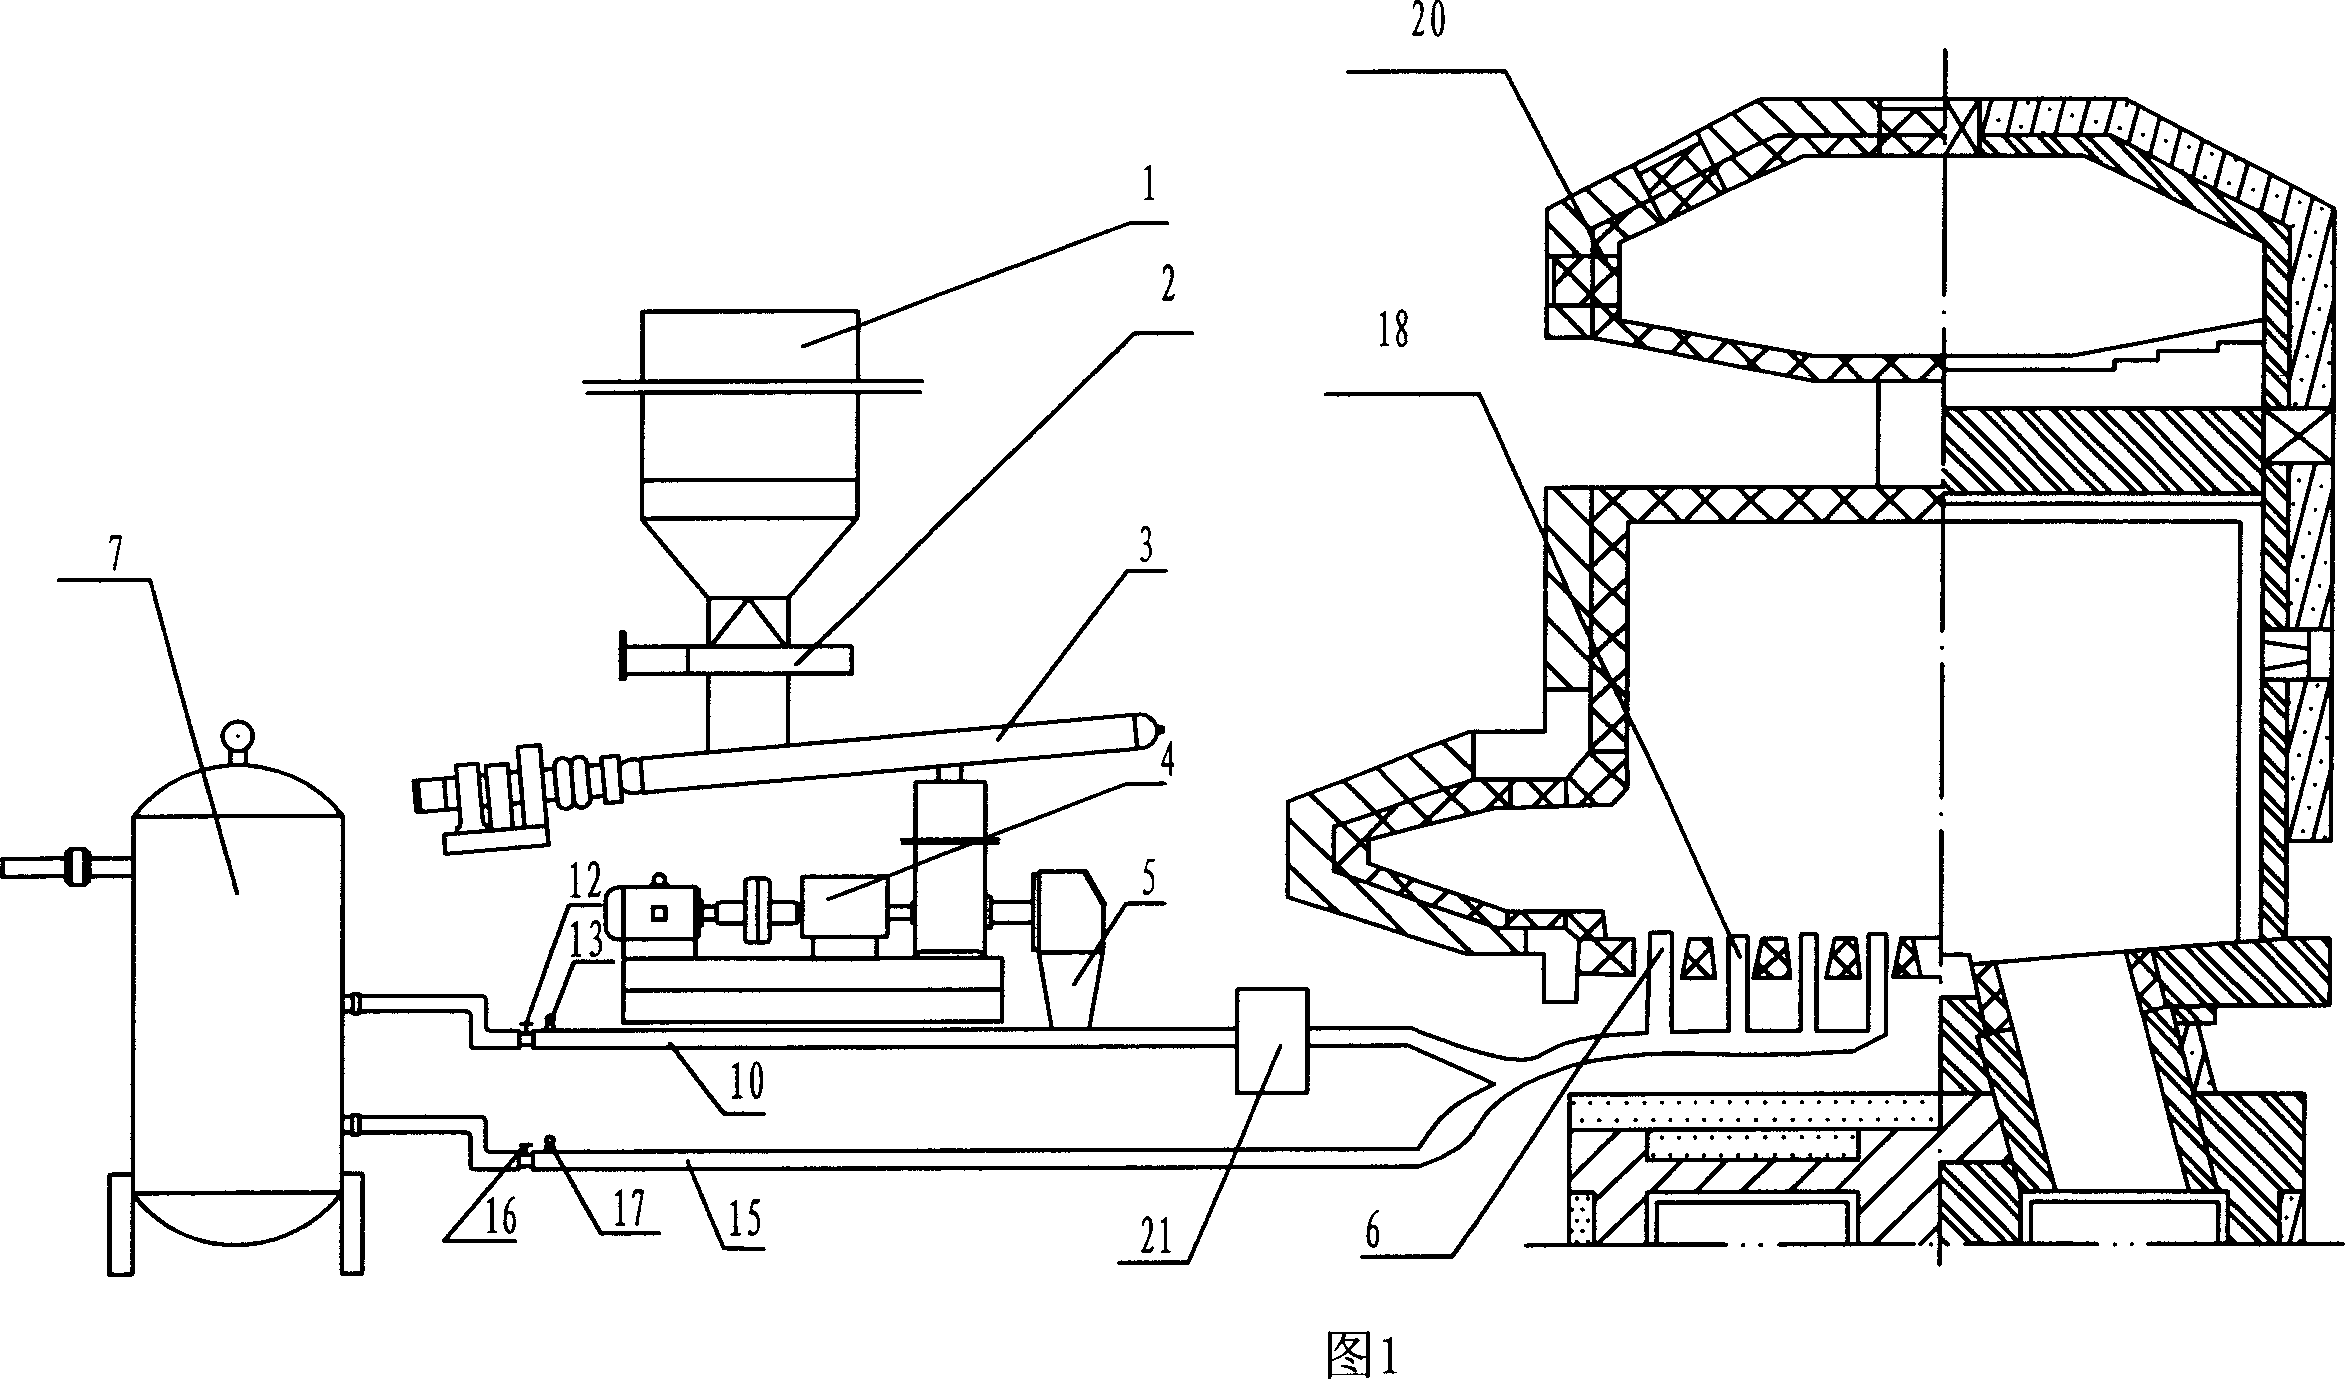 Using method and apparatus for petroleum coke powder fuel for smelting glass